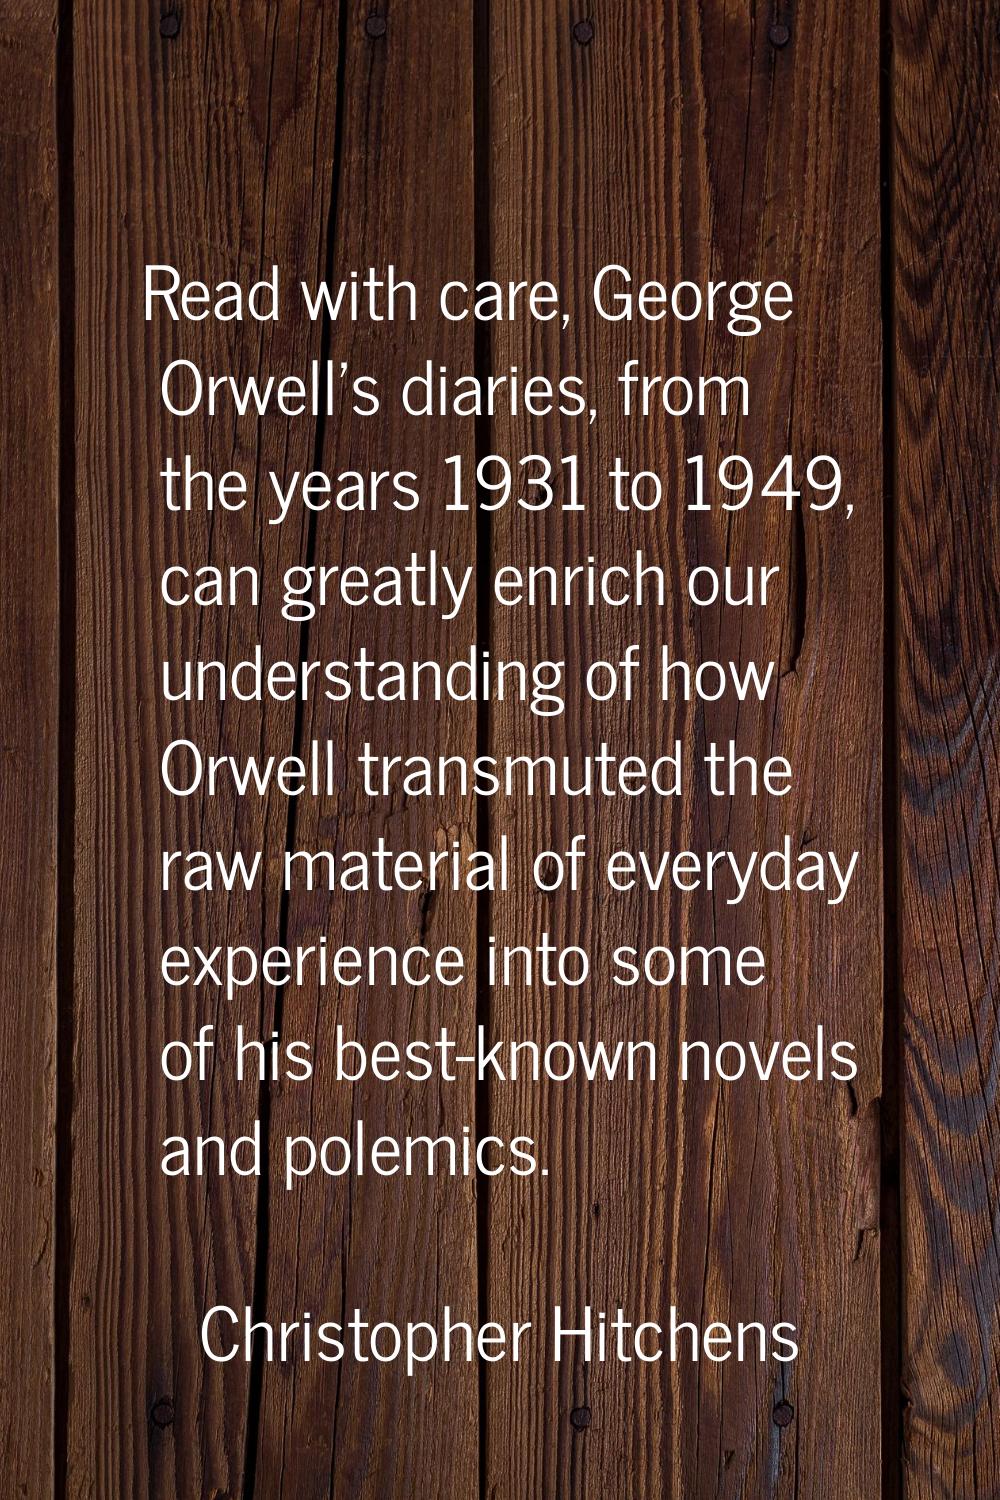 Read with care, George Orwell's diaries, from the years 1931 to 1949, can greatly enrich our unders